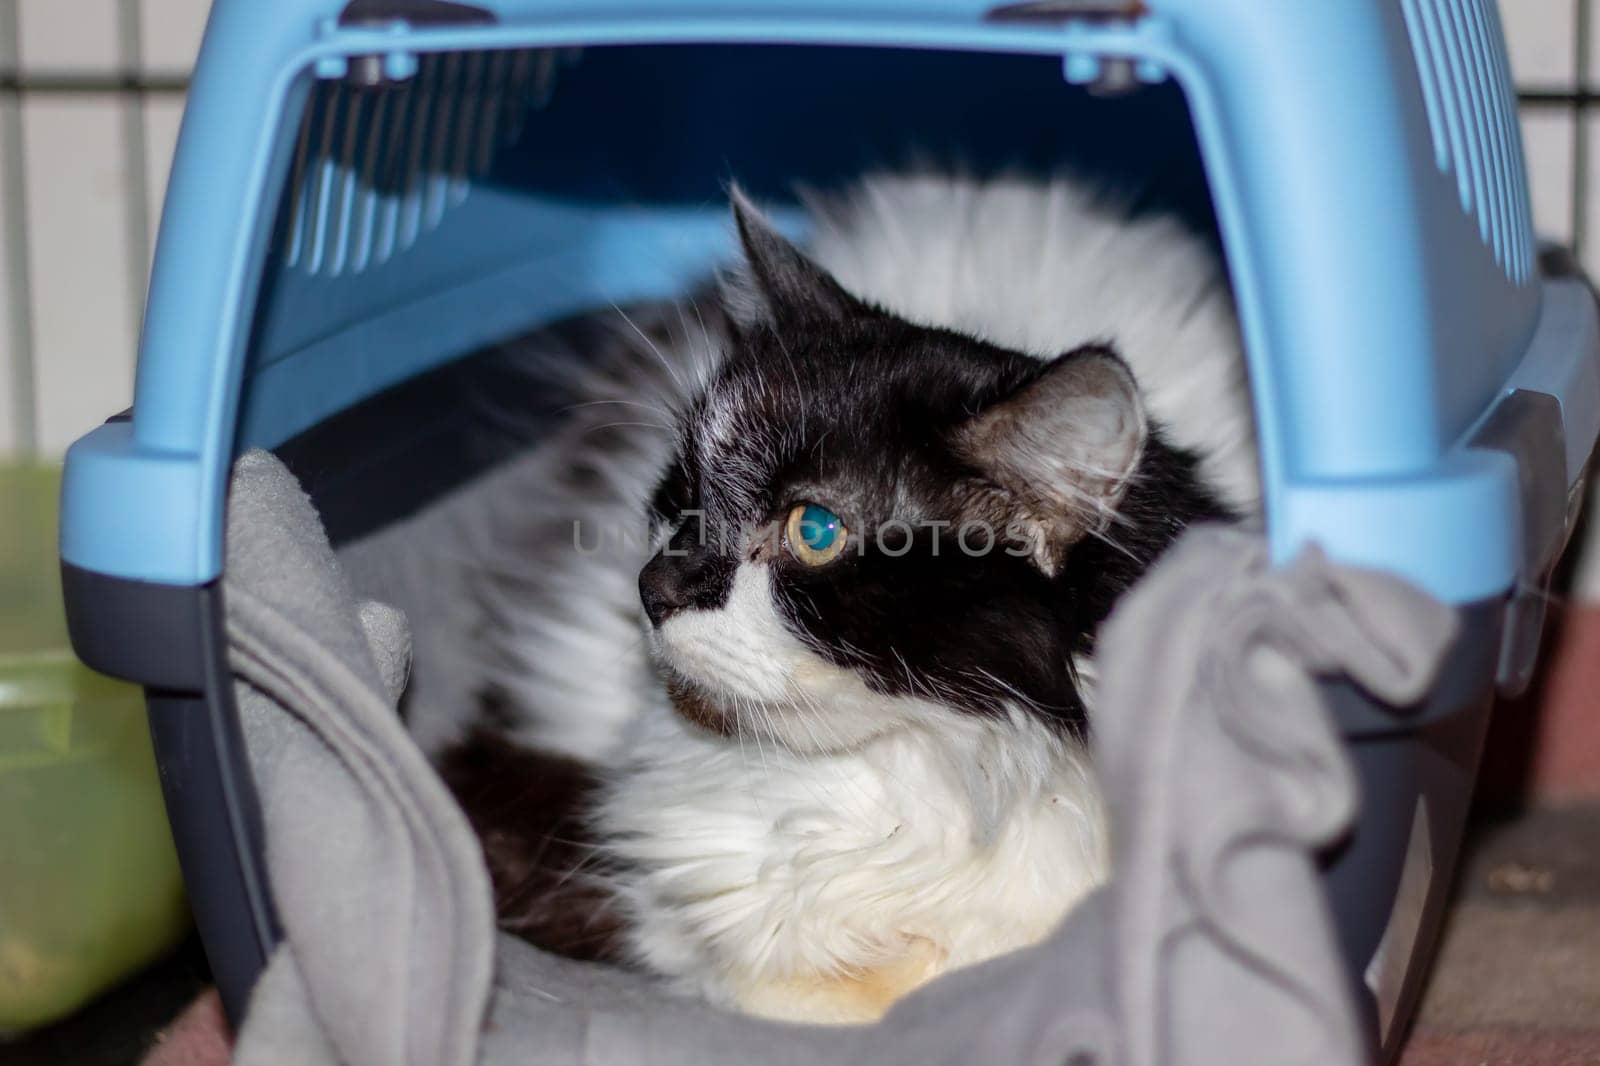 A Felidae, small to mediumsized cat with black and white fur is inside a blue carrier in a vehicle. It is a carnivorous mammal with whiskers